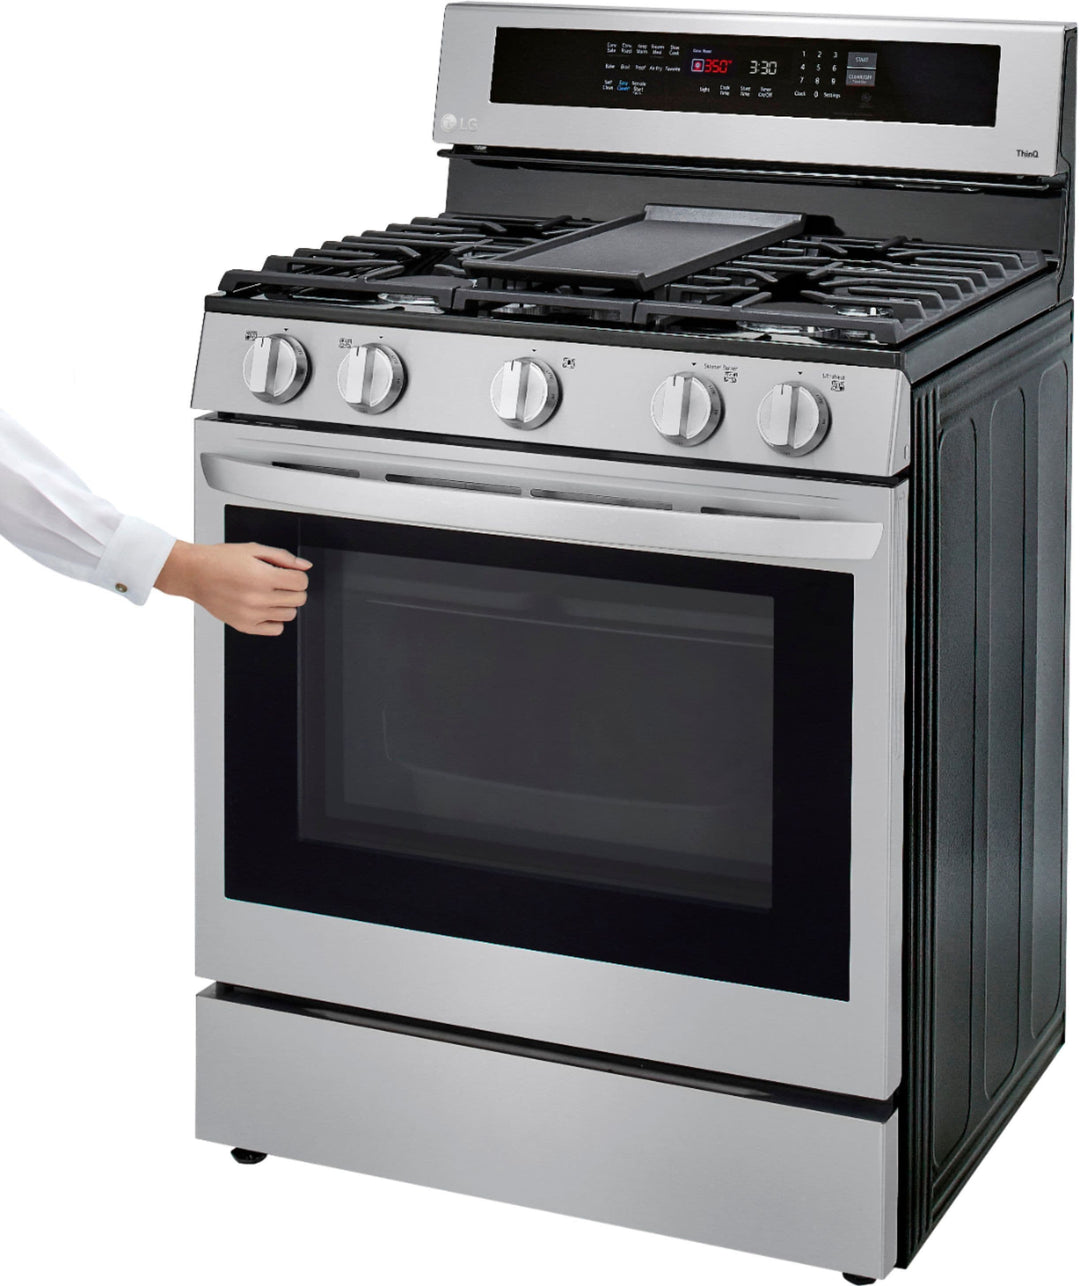 LG - 5.8 Cu. Ft. Freestanding Gas True Convection Range with EasyClean, InstaView and AirFry - Stainless steel_13